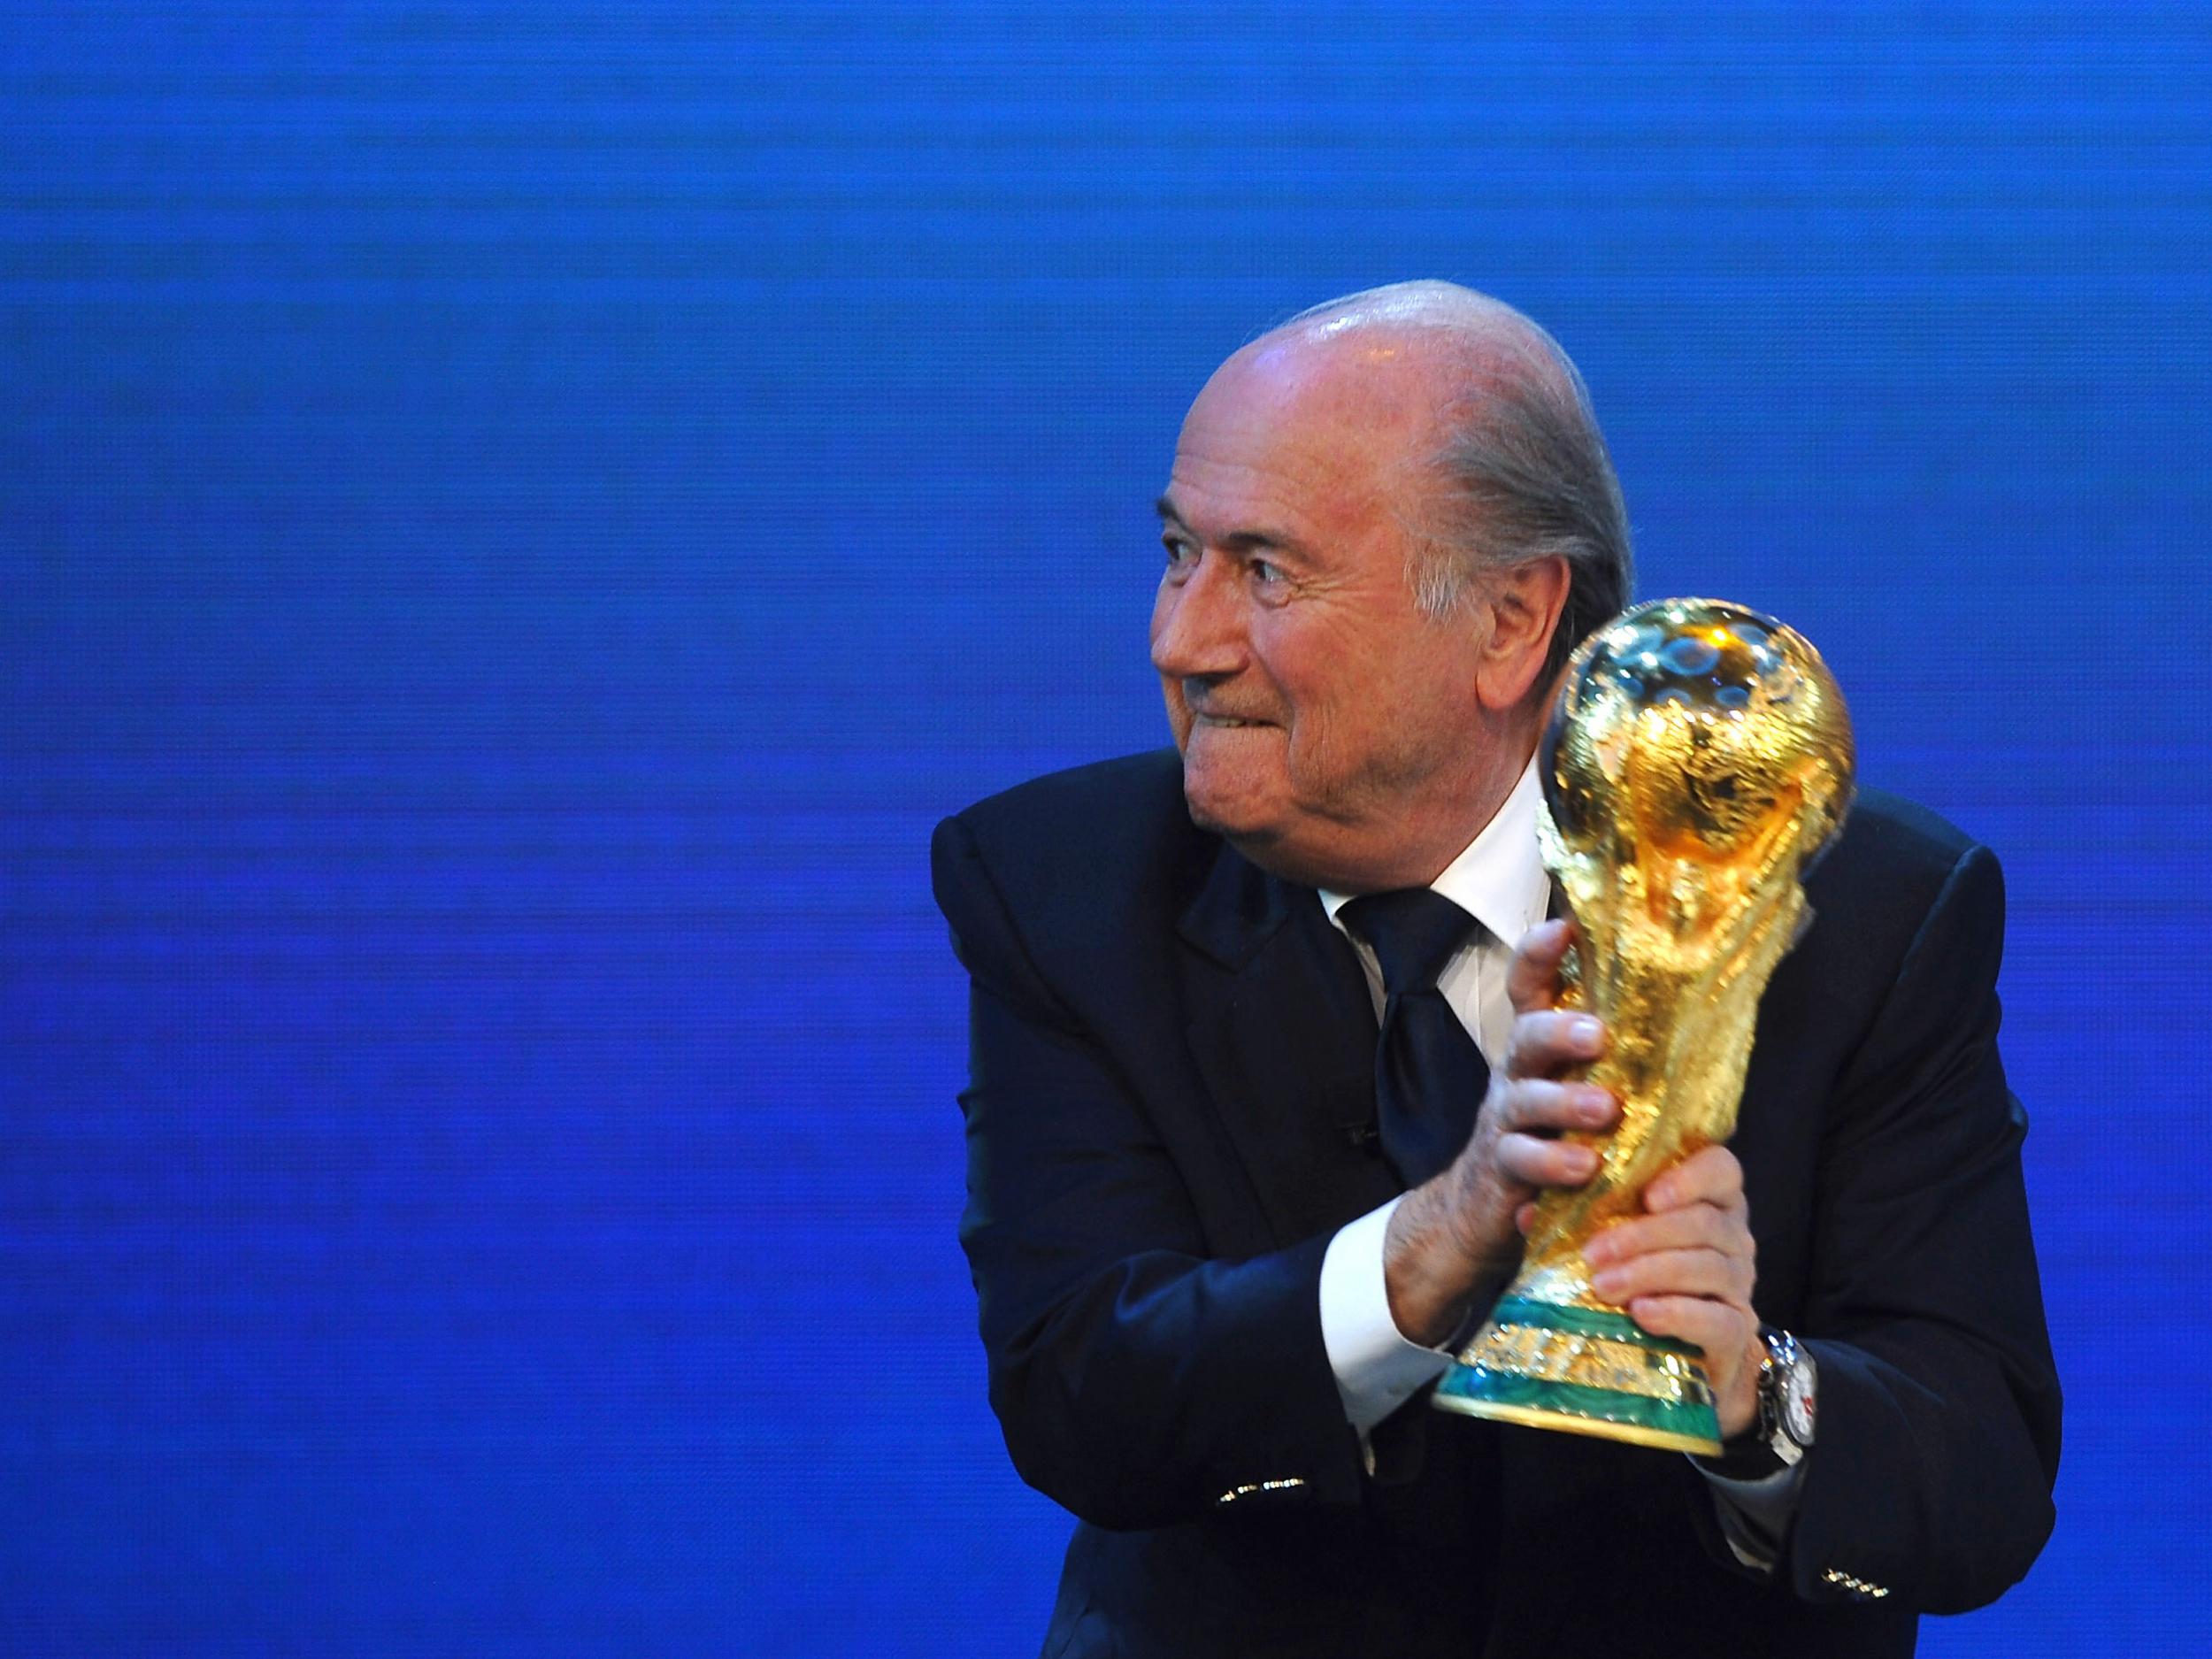 Sepp Blatter is serving a six-year ban from all football-related activity